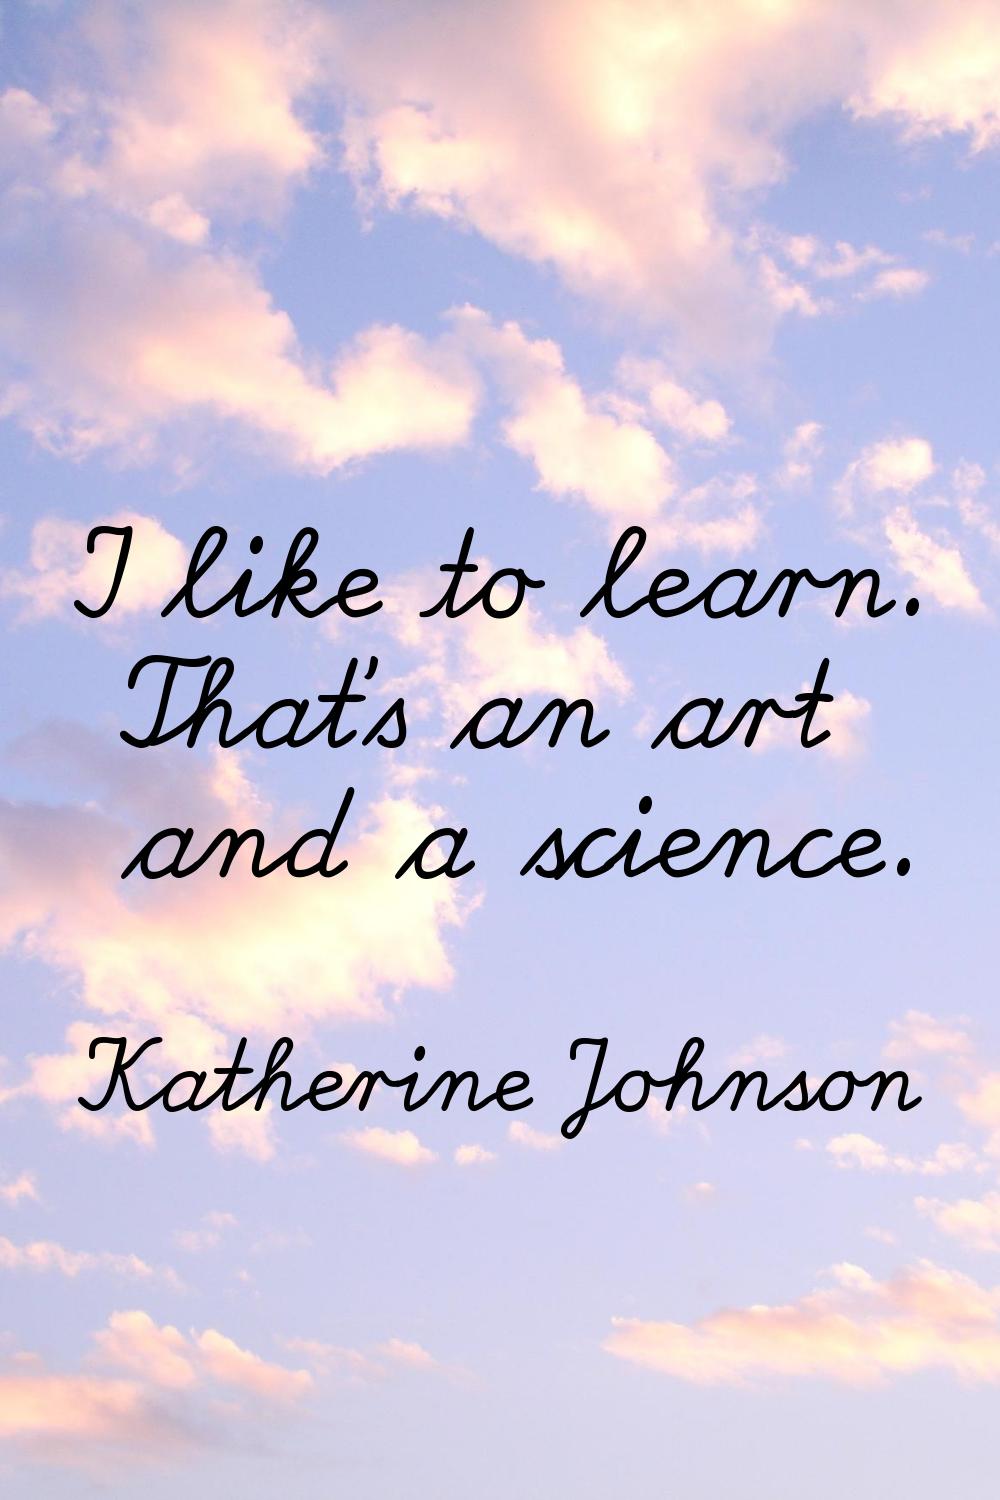 I like to learn. That's an art and a science.